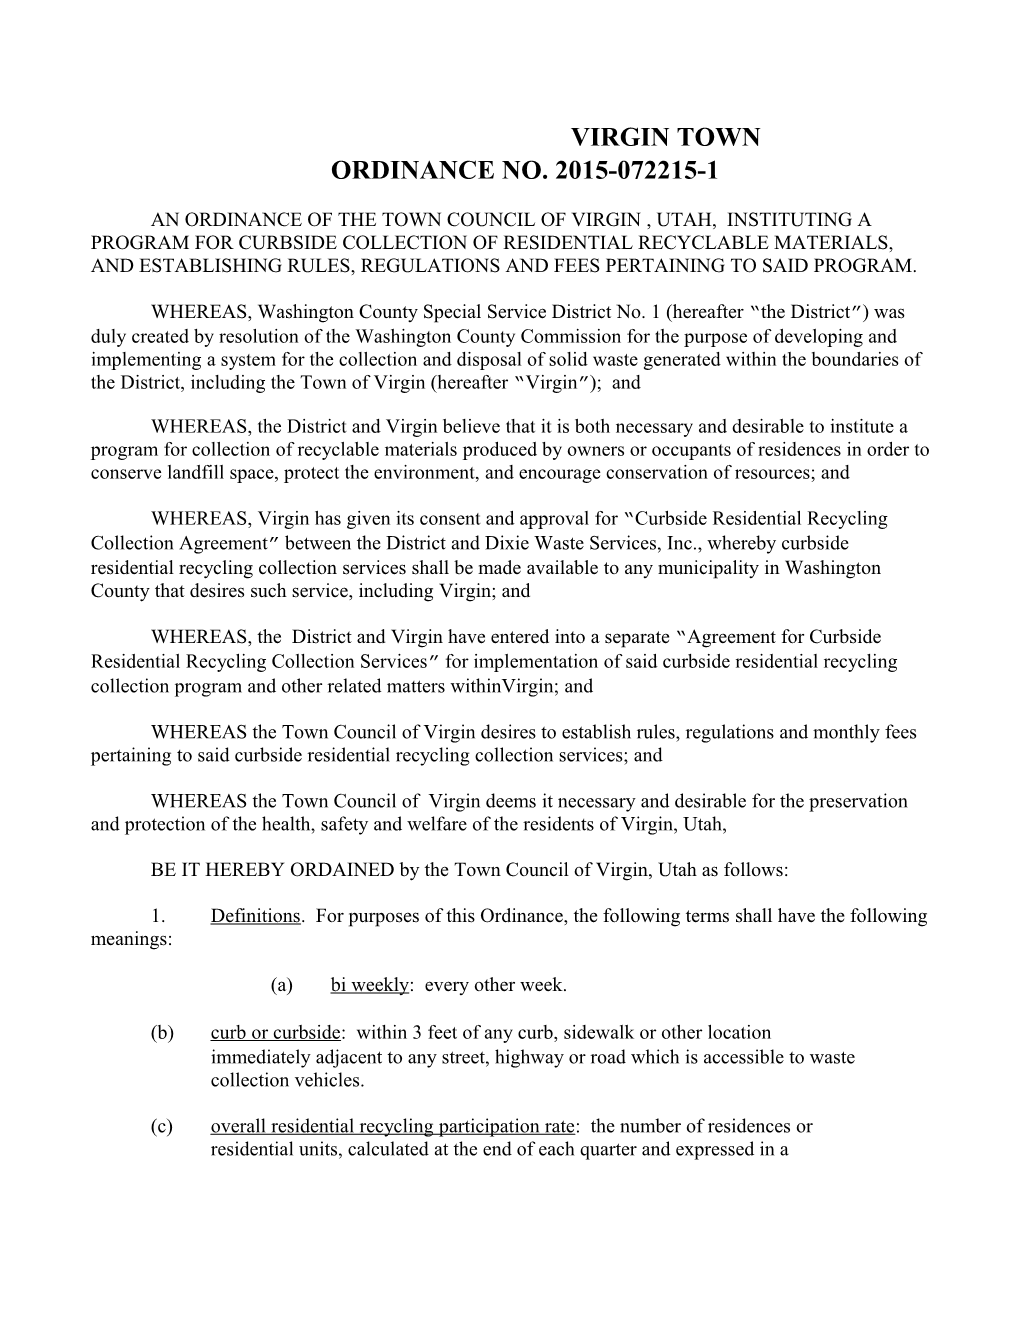 An Ordinance of the Town Council of Virgin , Utah, Instituting a Program for Curbside